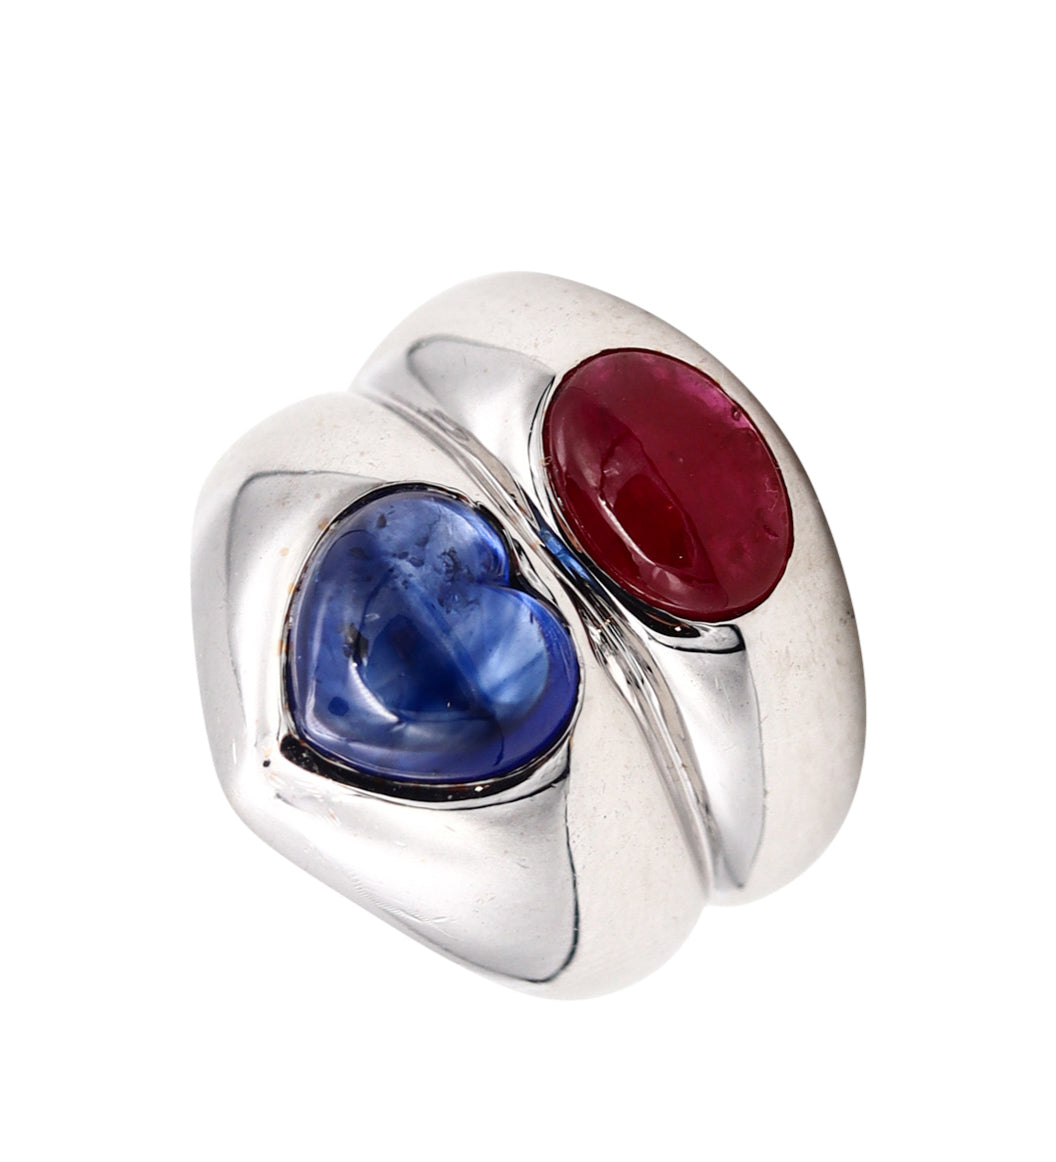 *Bvlgari Roma Doppio Cocktail Ring In 18Kt White Gold With Gia Certified 4.41 Cts In Red Ruby & Ceylon Sapphire